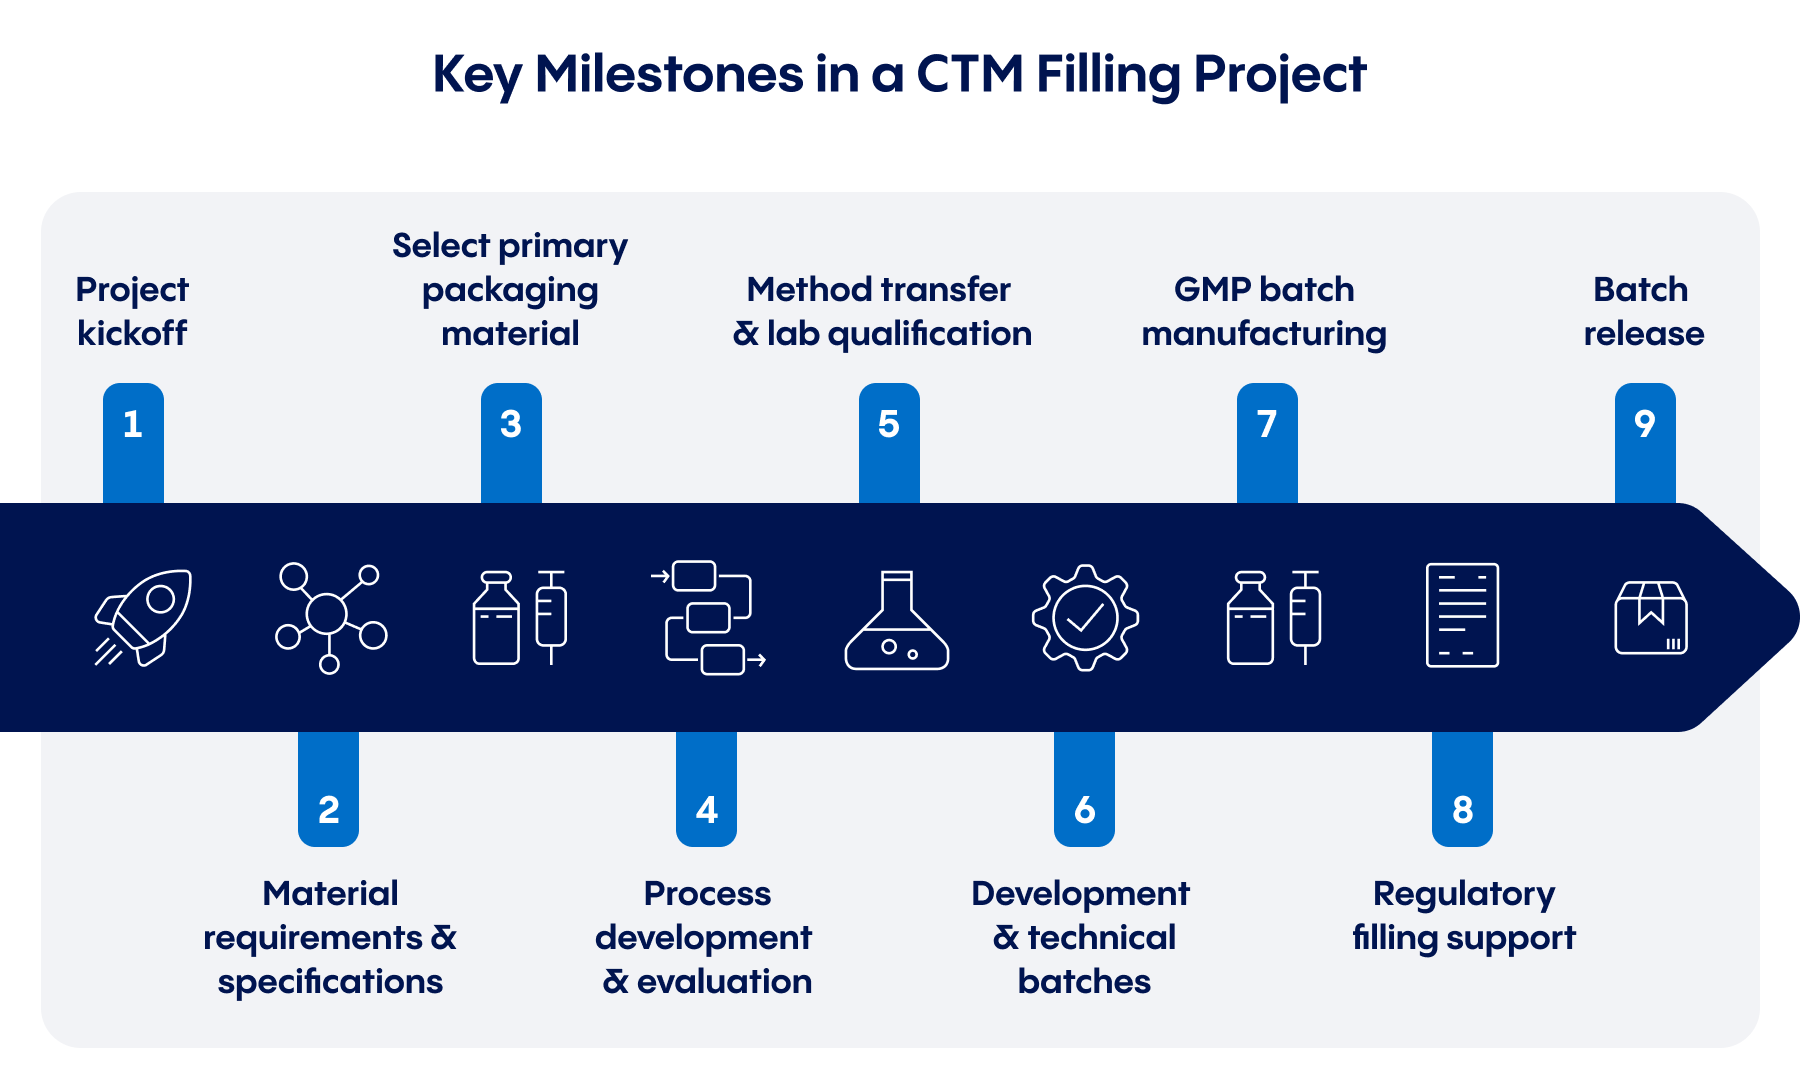 Infographic project milestones for a clinical trial filling project